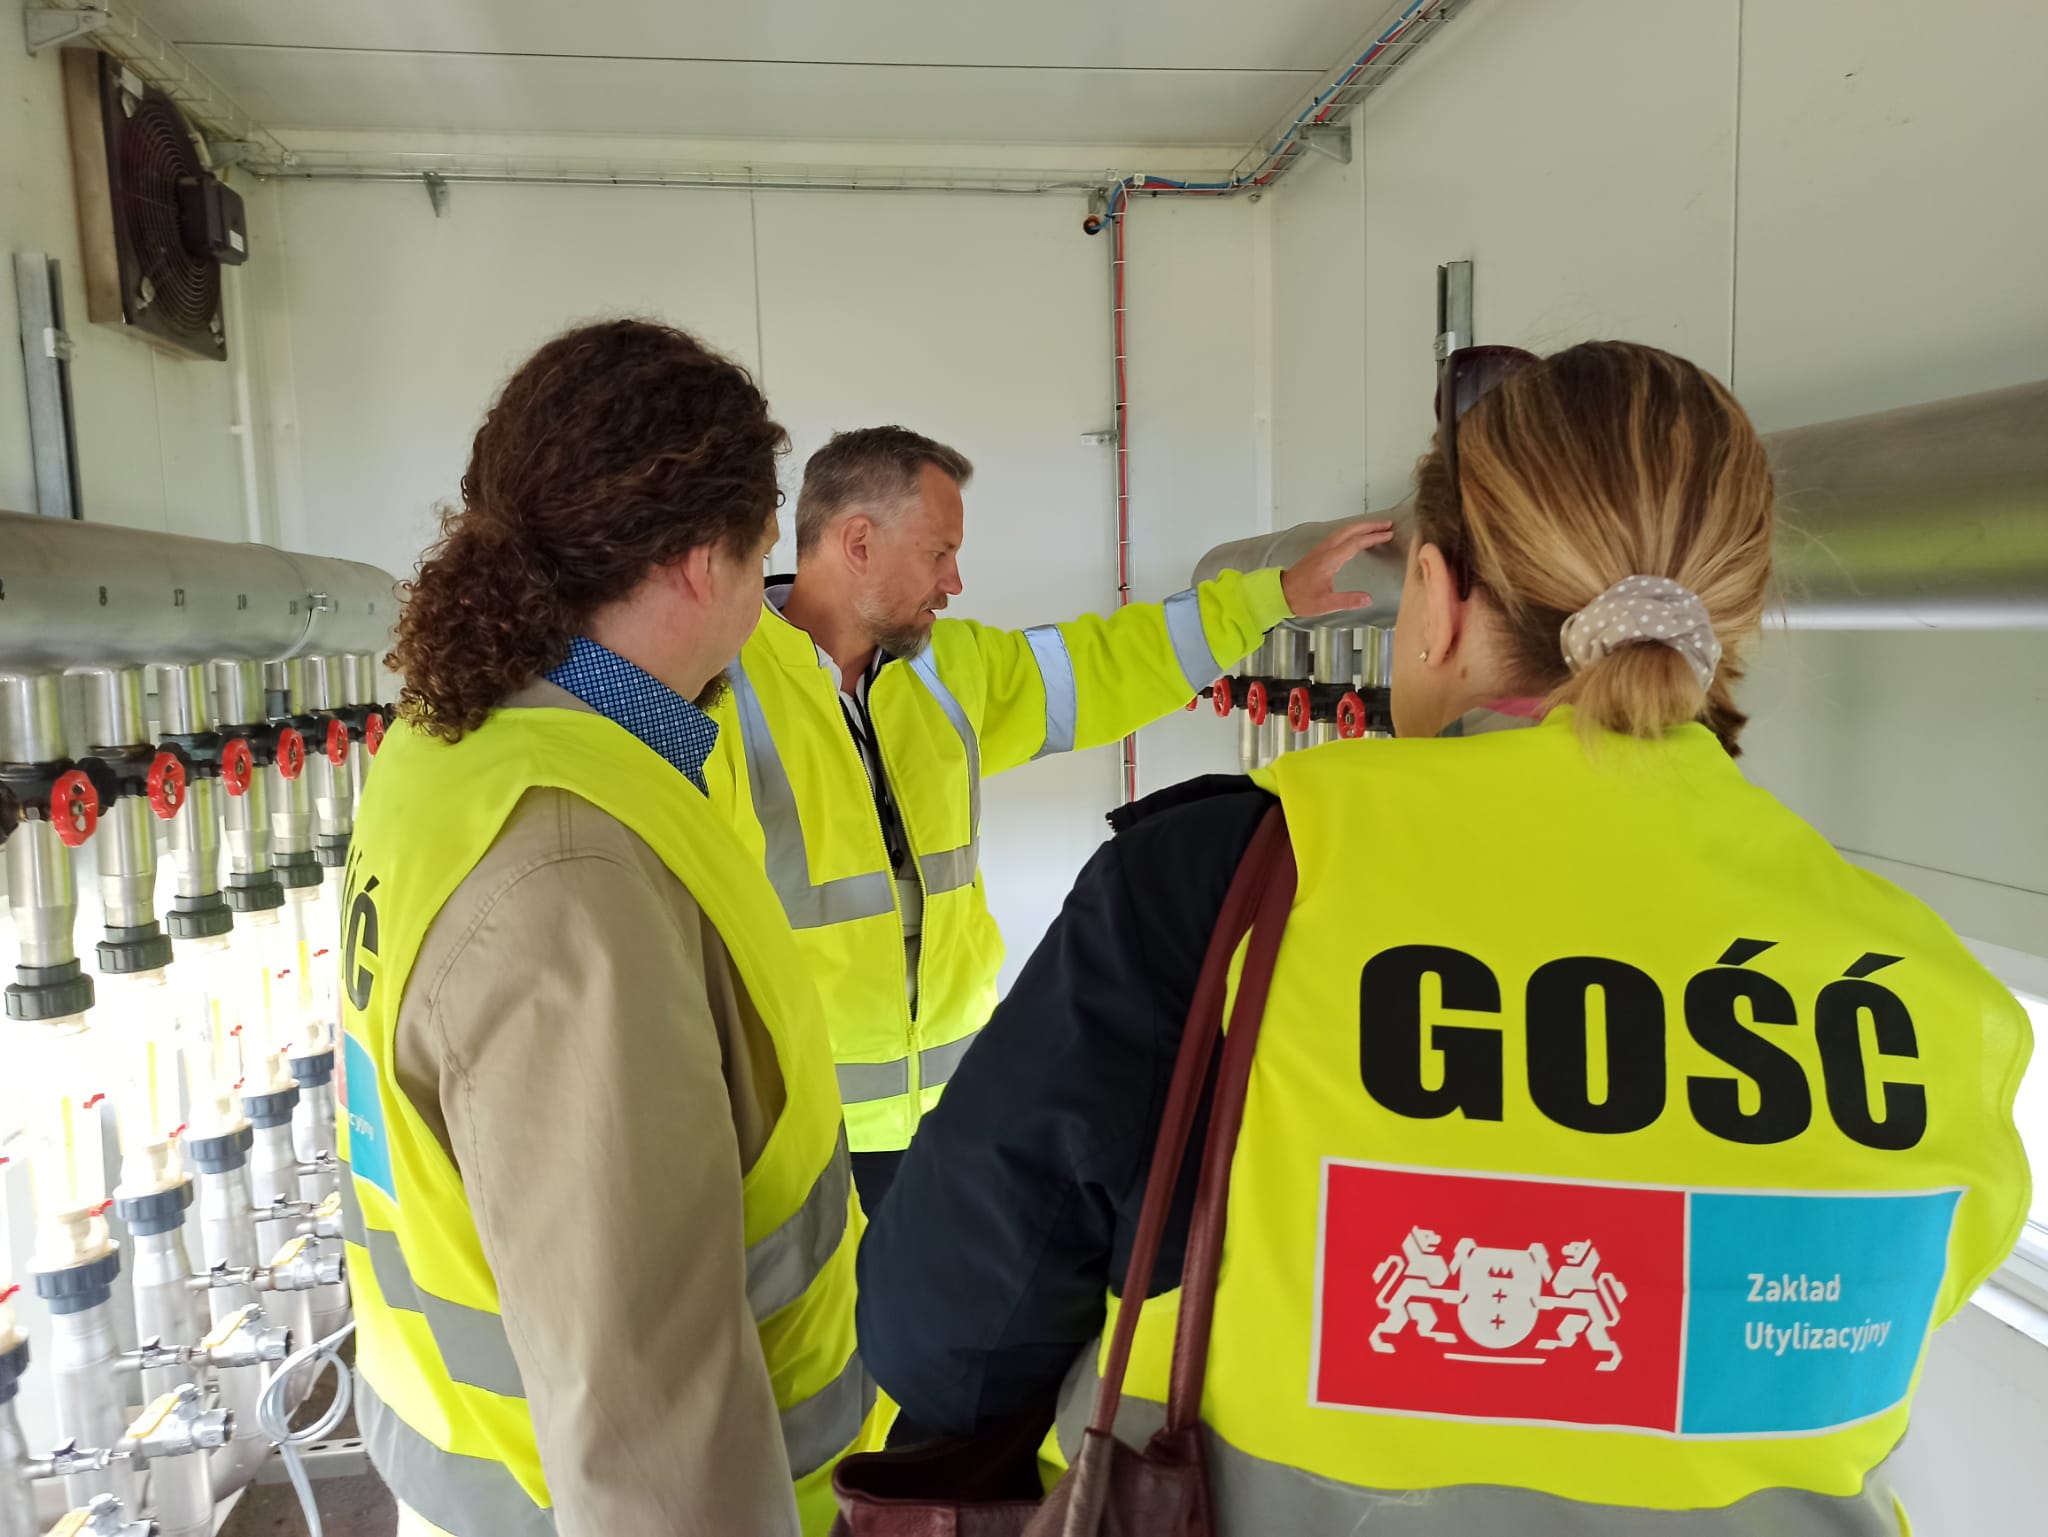 All photos show the partners of the Liquid Energy project from Poland, Lithuania and Estonia during a visit to the Waste Treatment Utility Gdańsk. They are guided by their president, Grzegorz Orzeszko, who presents the degassing system of a landfill.